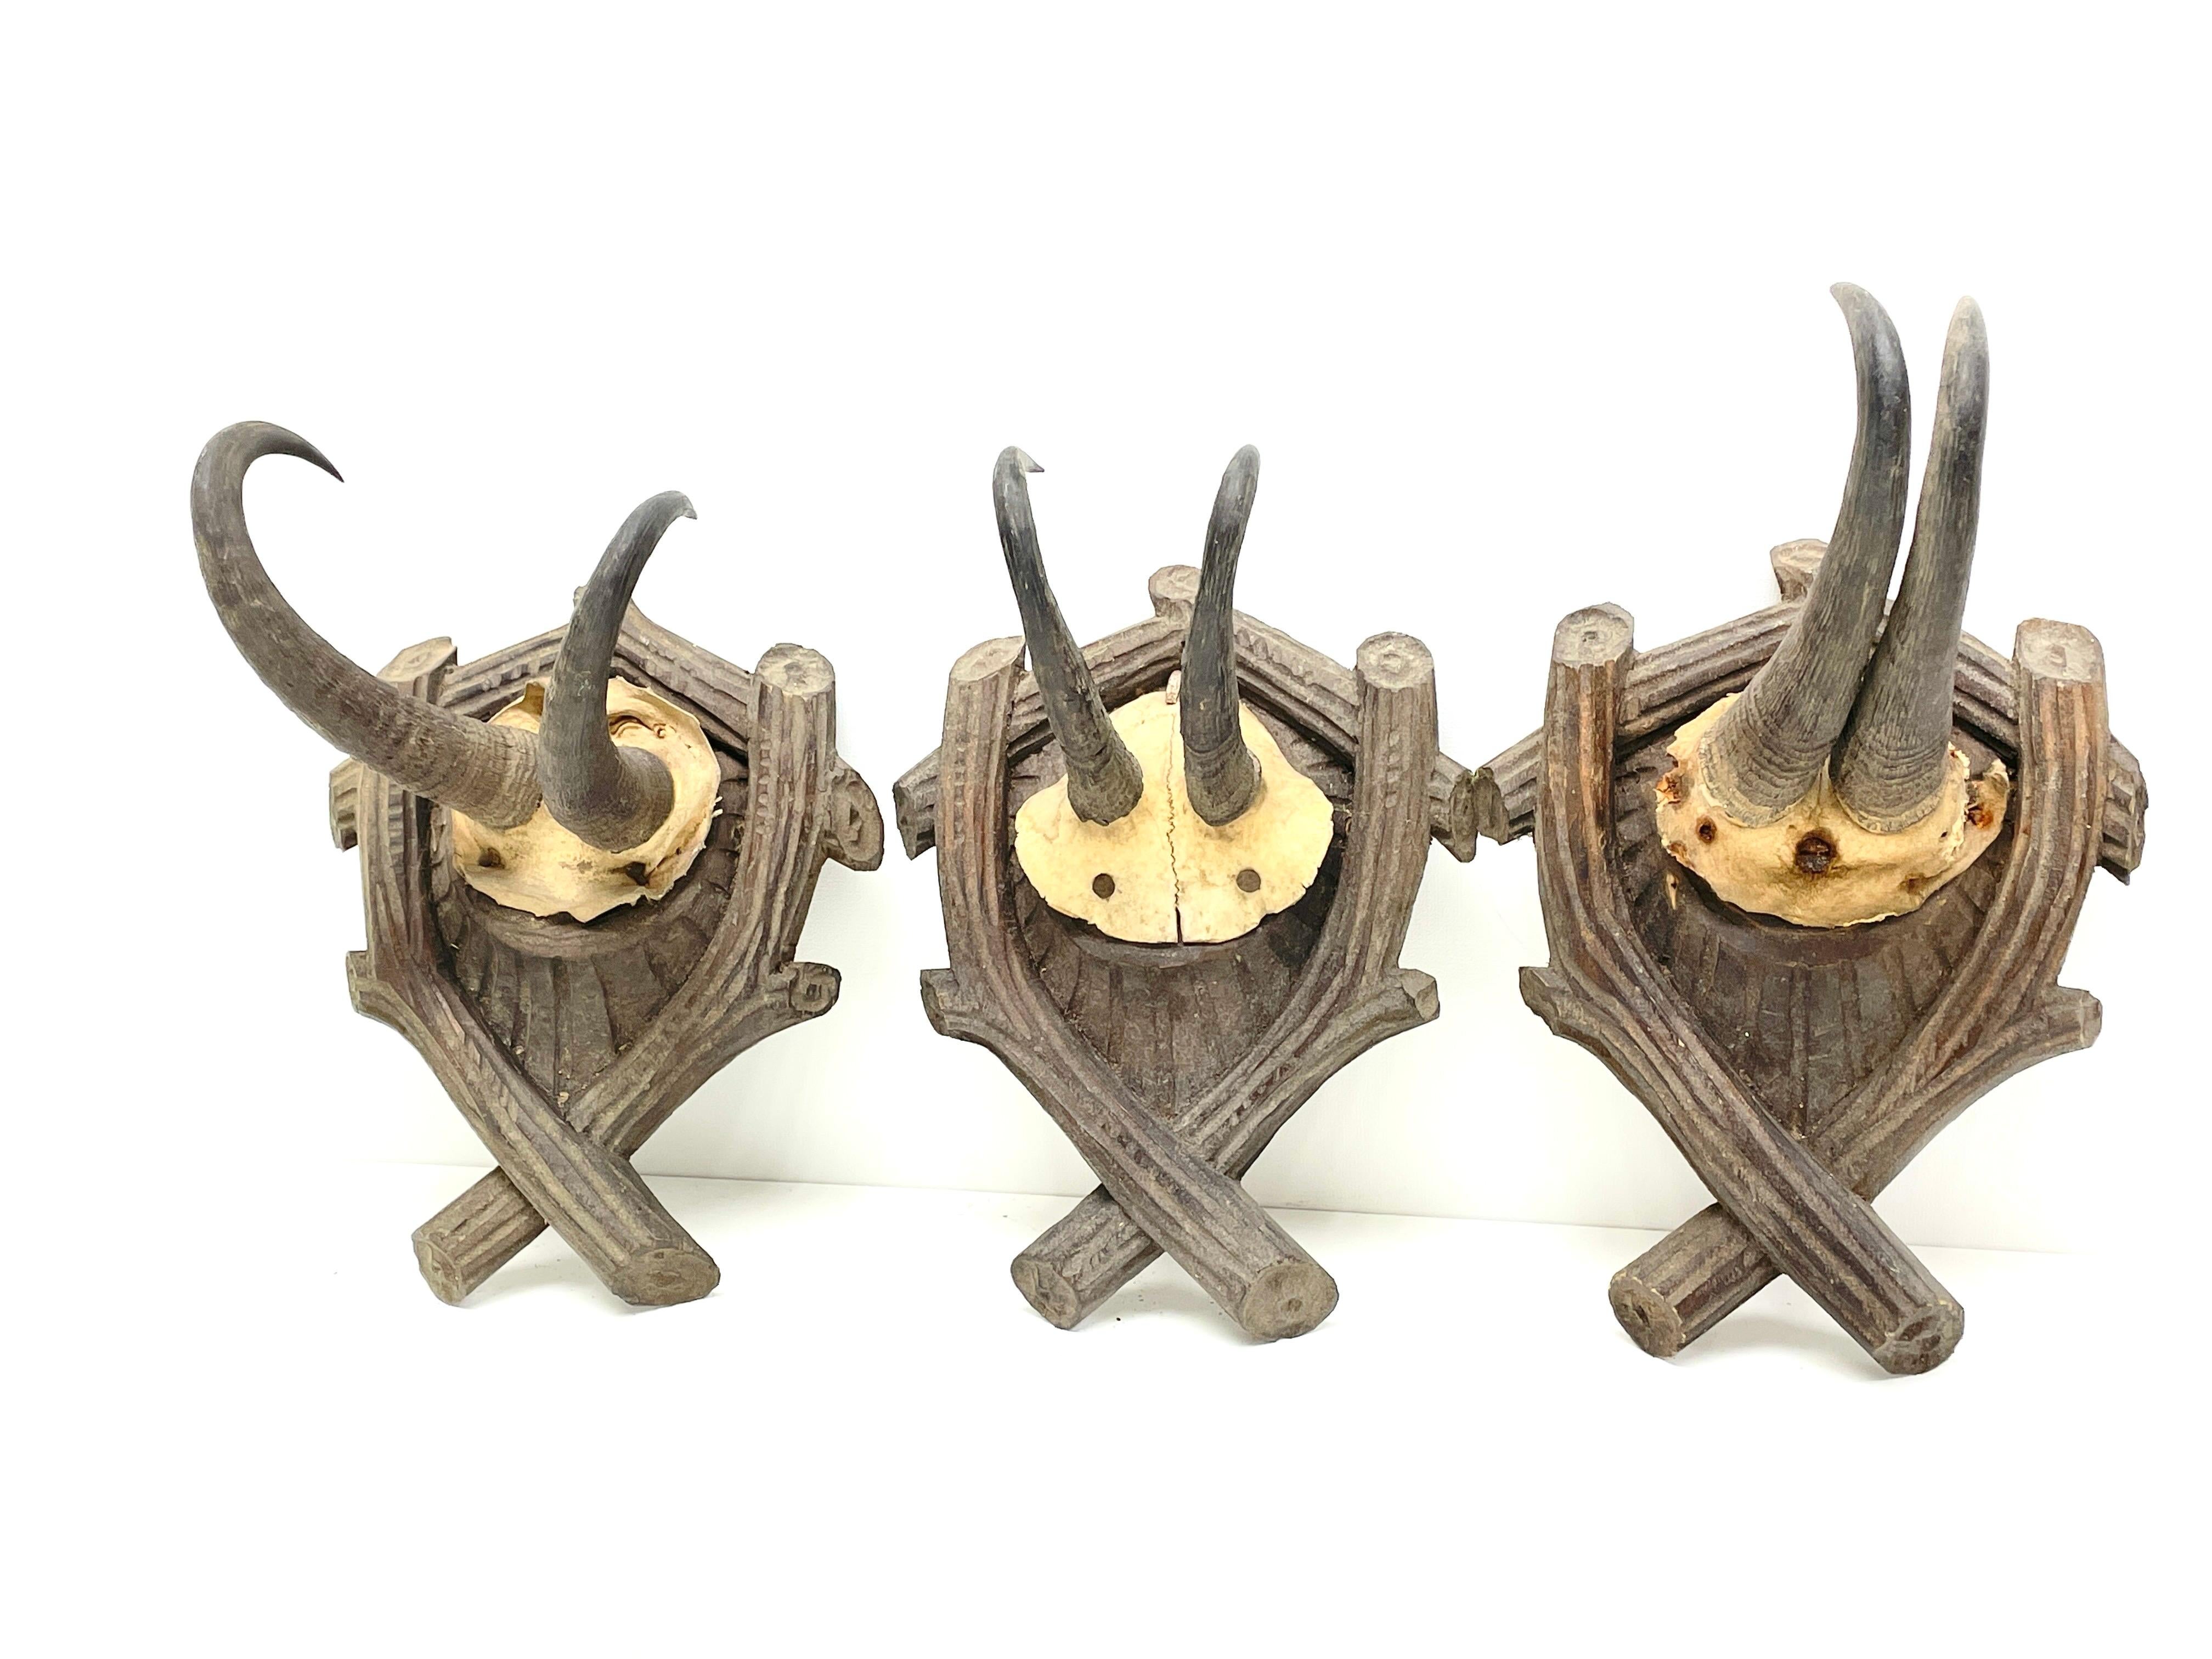 A set of three antique Austrian Alps Chamois antler trophies on hand carved, Black Forest wooden plaques. I think they are from the 1890s or older. Tallest is approximate 10